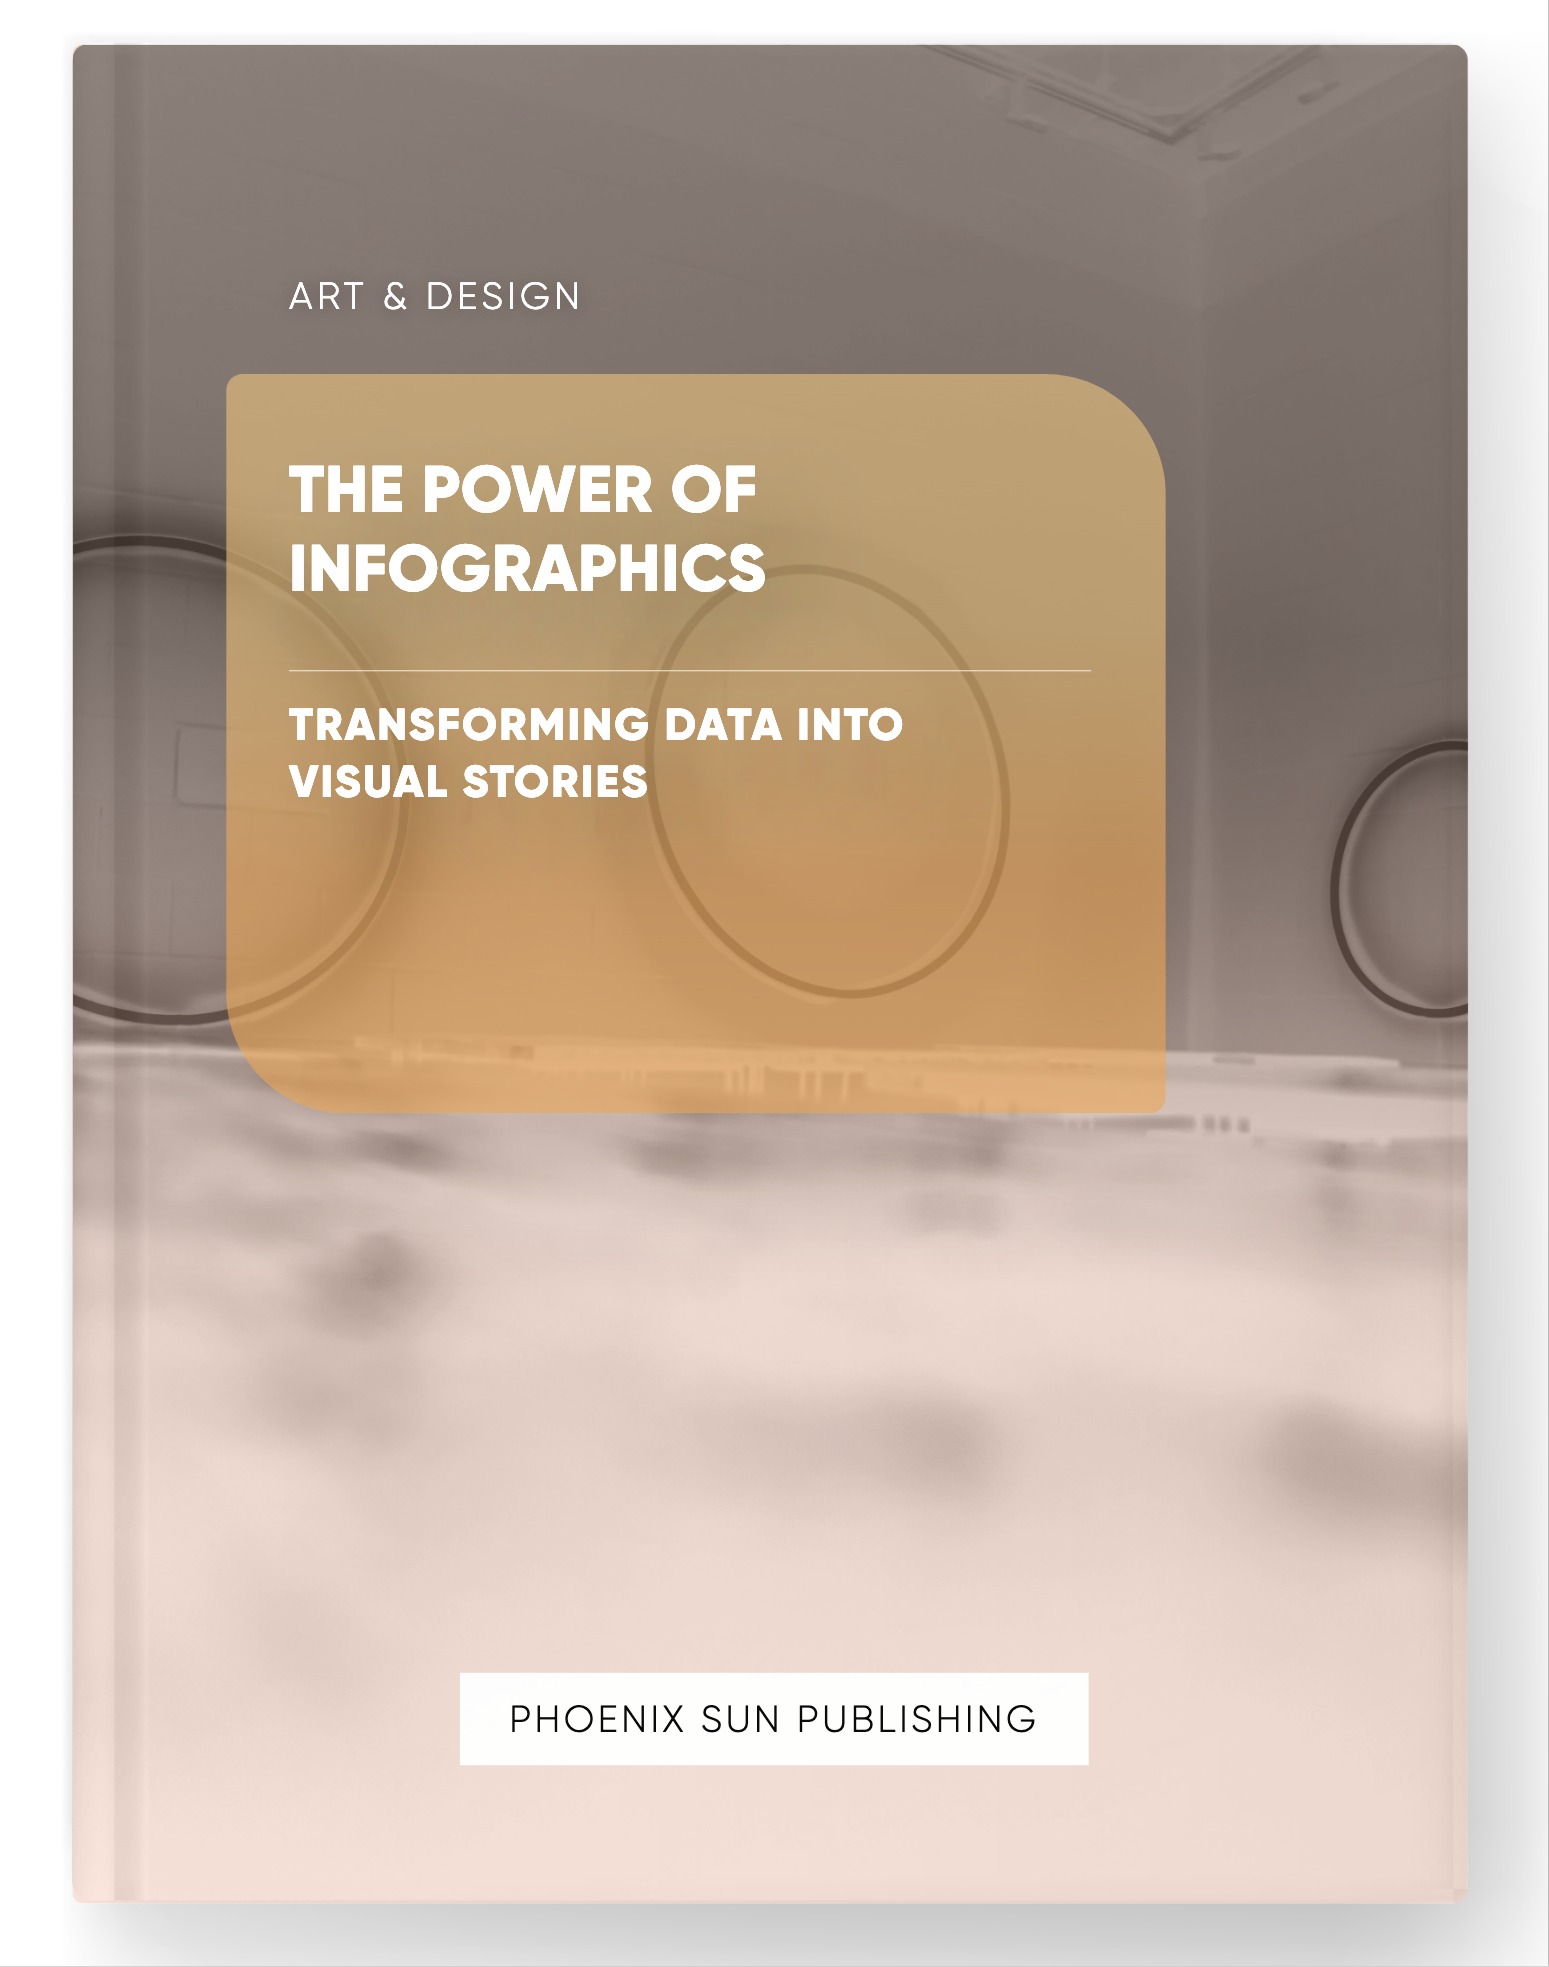 The Power of Infographics – Transforming Data into Visual Stories